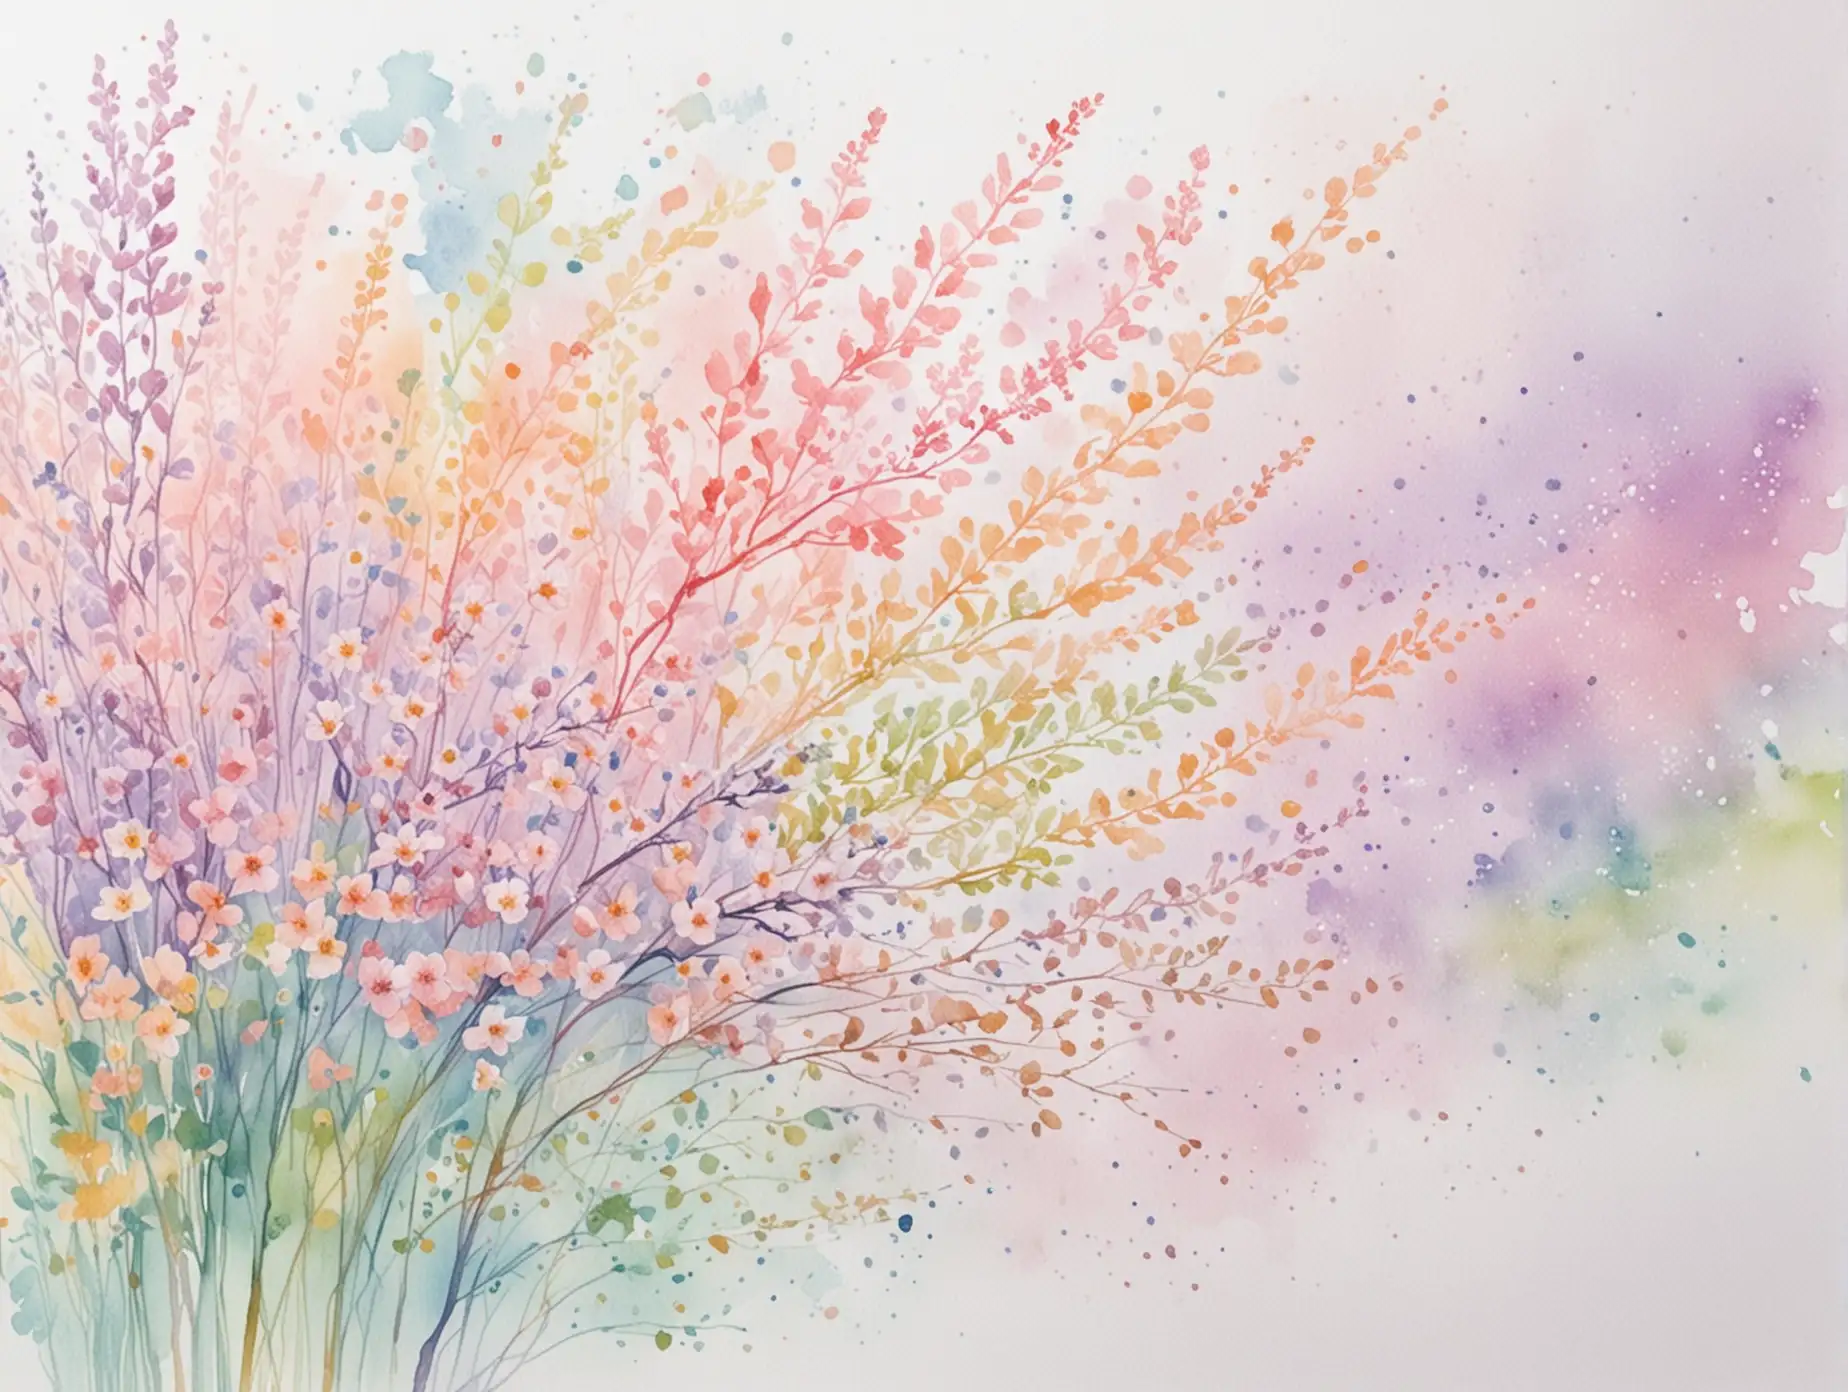 Dreamy Pastel Watercolor Spots on White Background